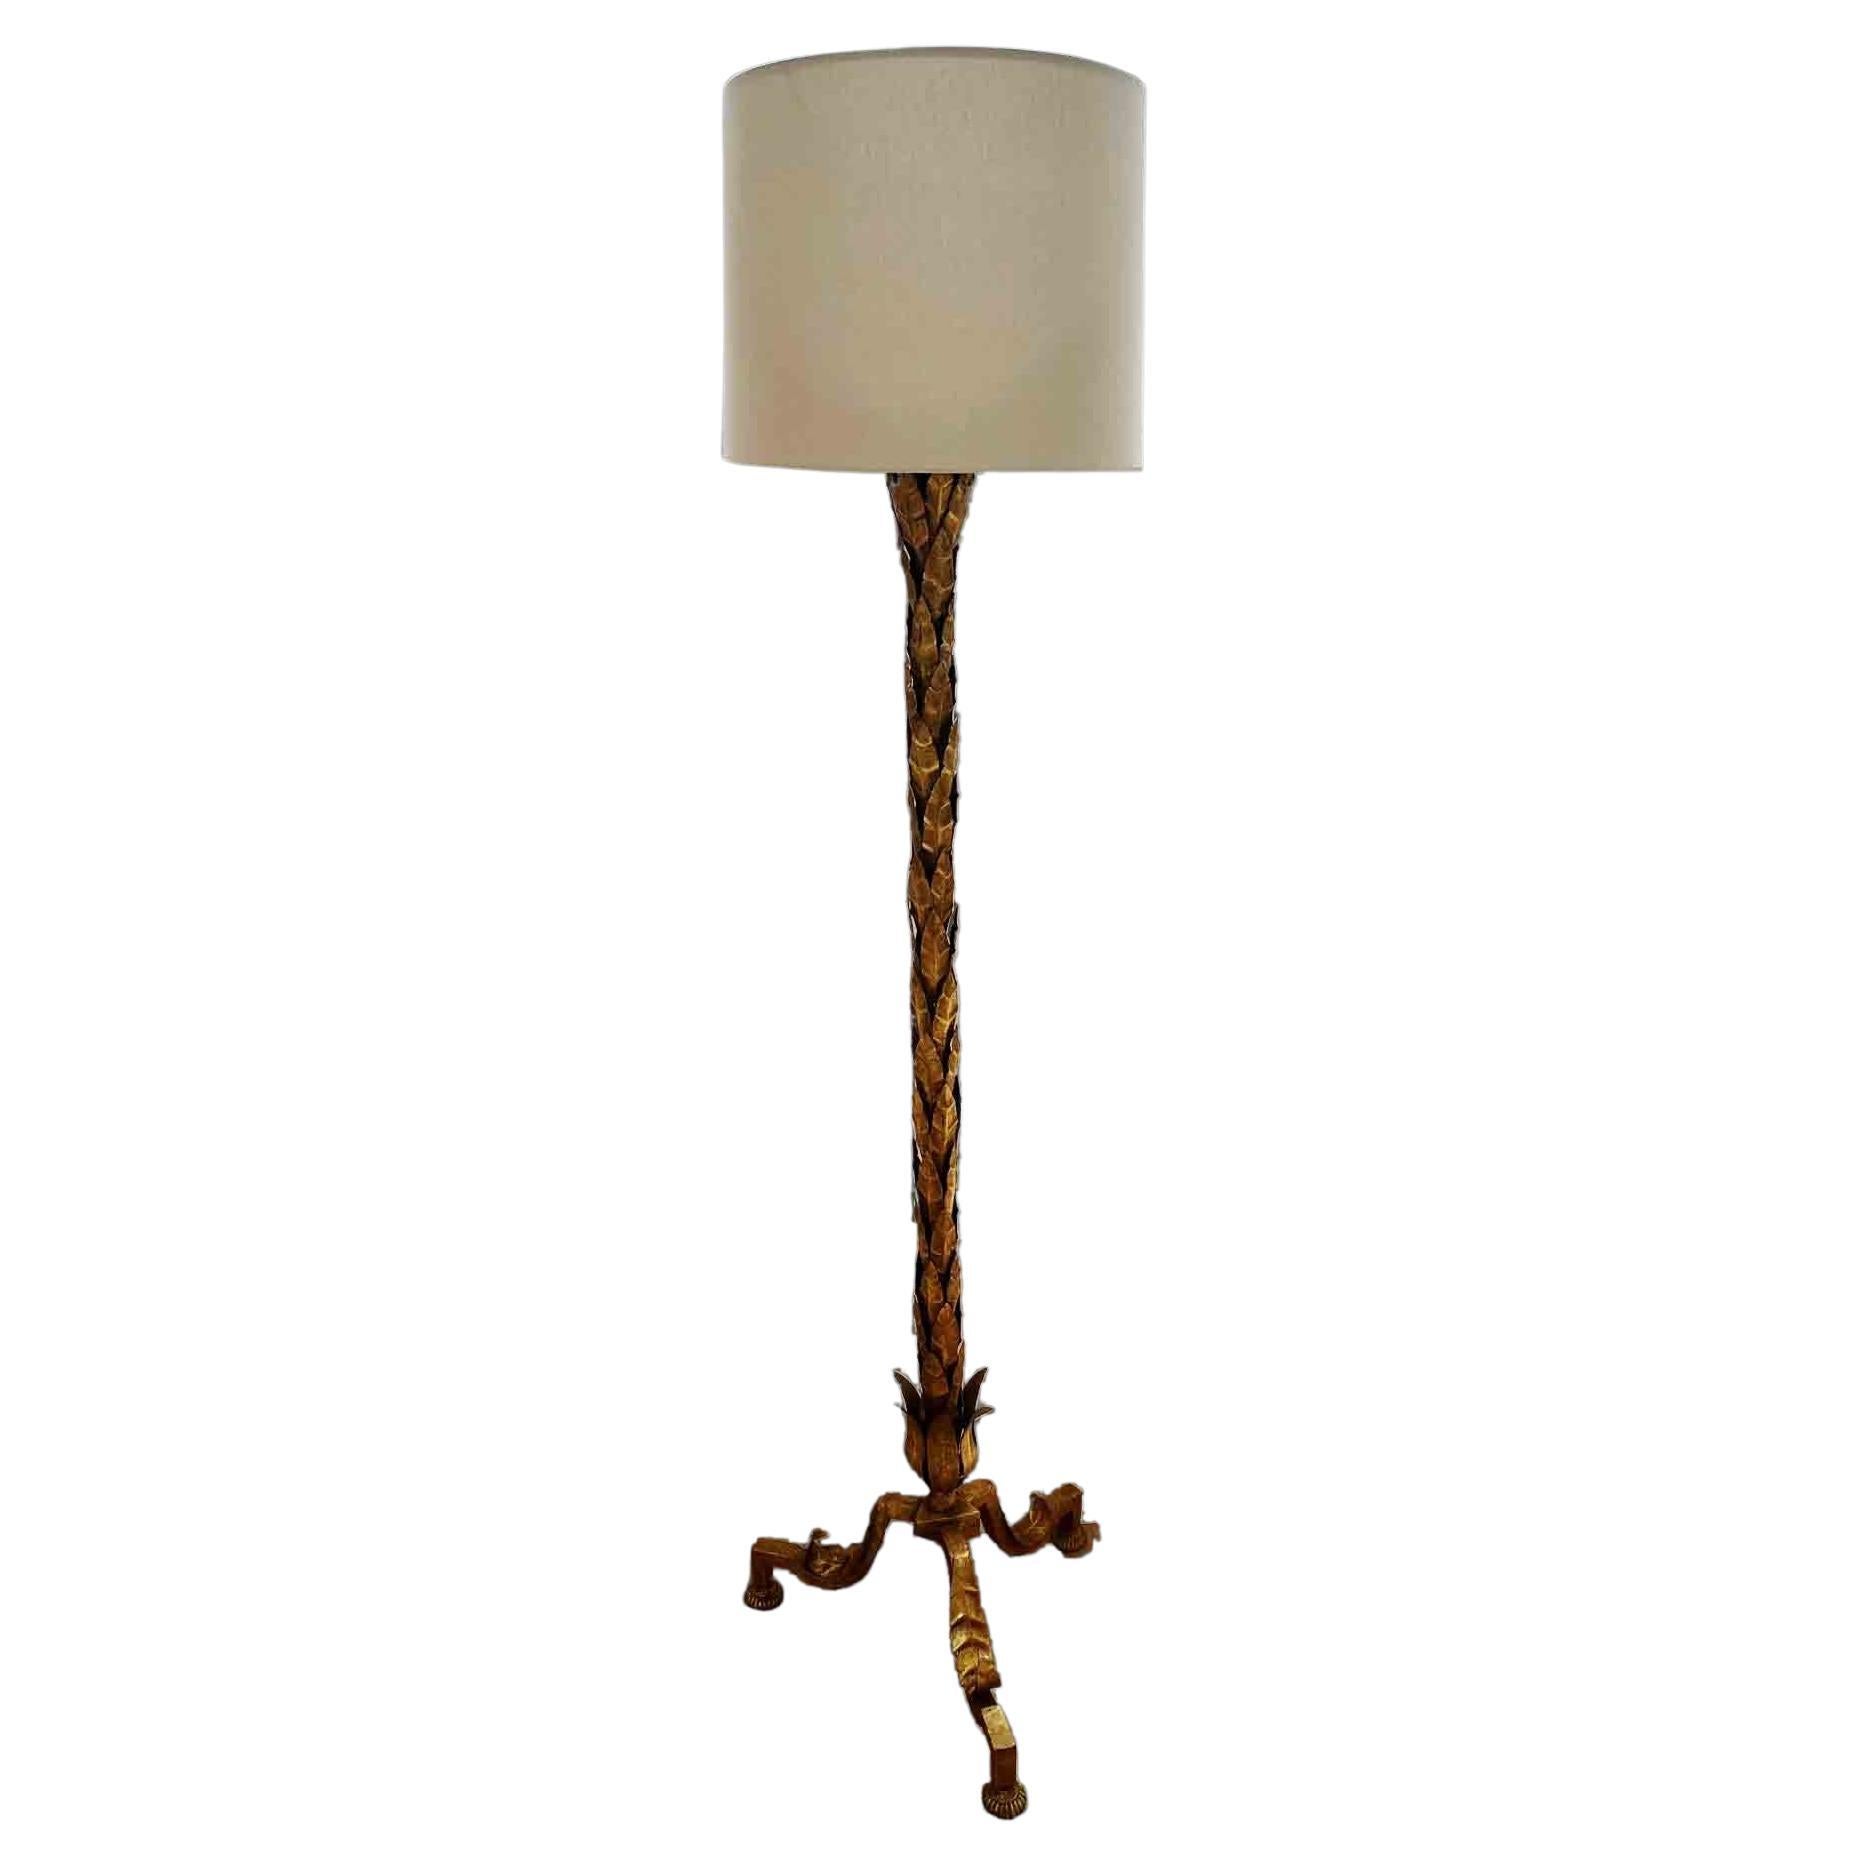 Mild Steel Leaf Floor Lamp with Antique Gold Finish, Pull Chain Double Sockets, Recommend 60 Watts Light Bulb Each Socket,
Beige Linen Shade Included